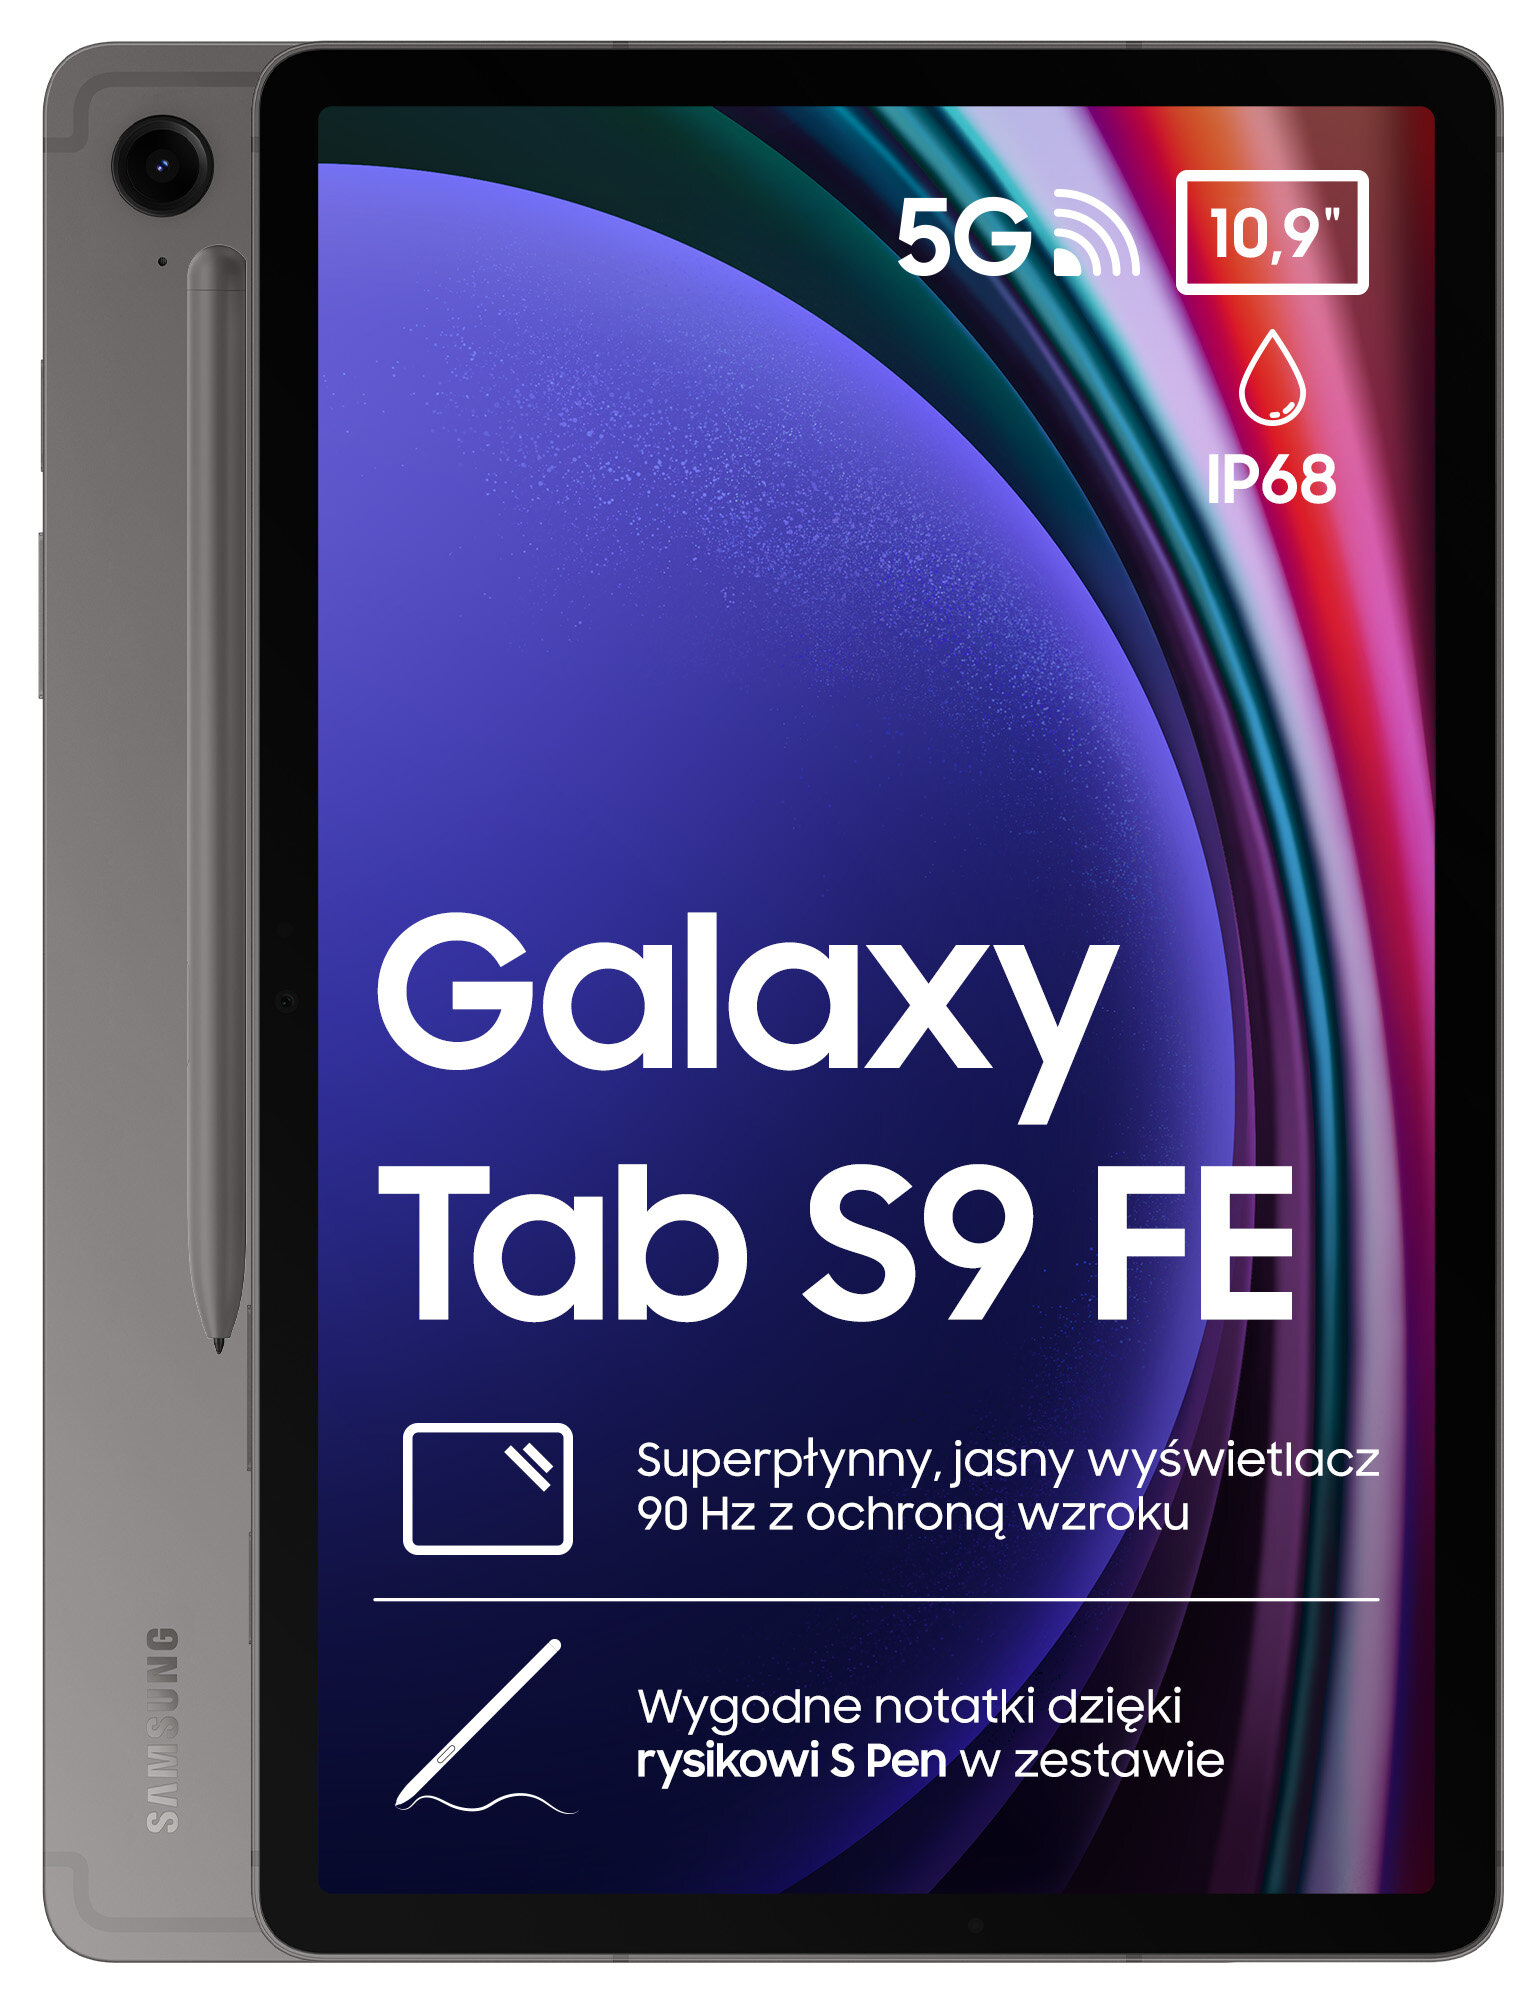 Samsung Galaxy Tablets, Latest Deals & Offers